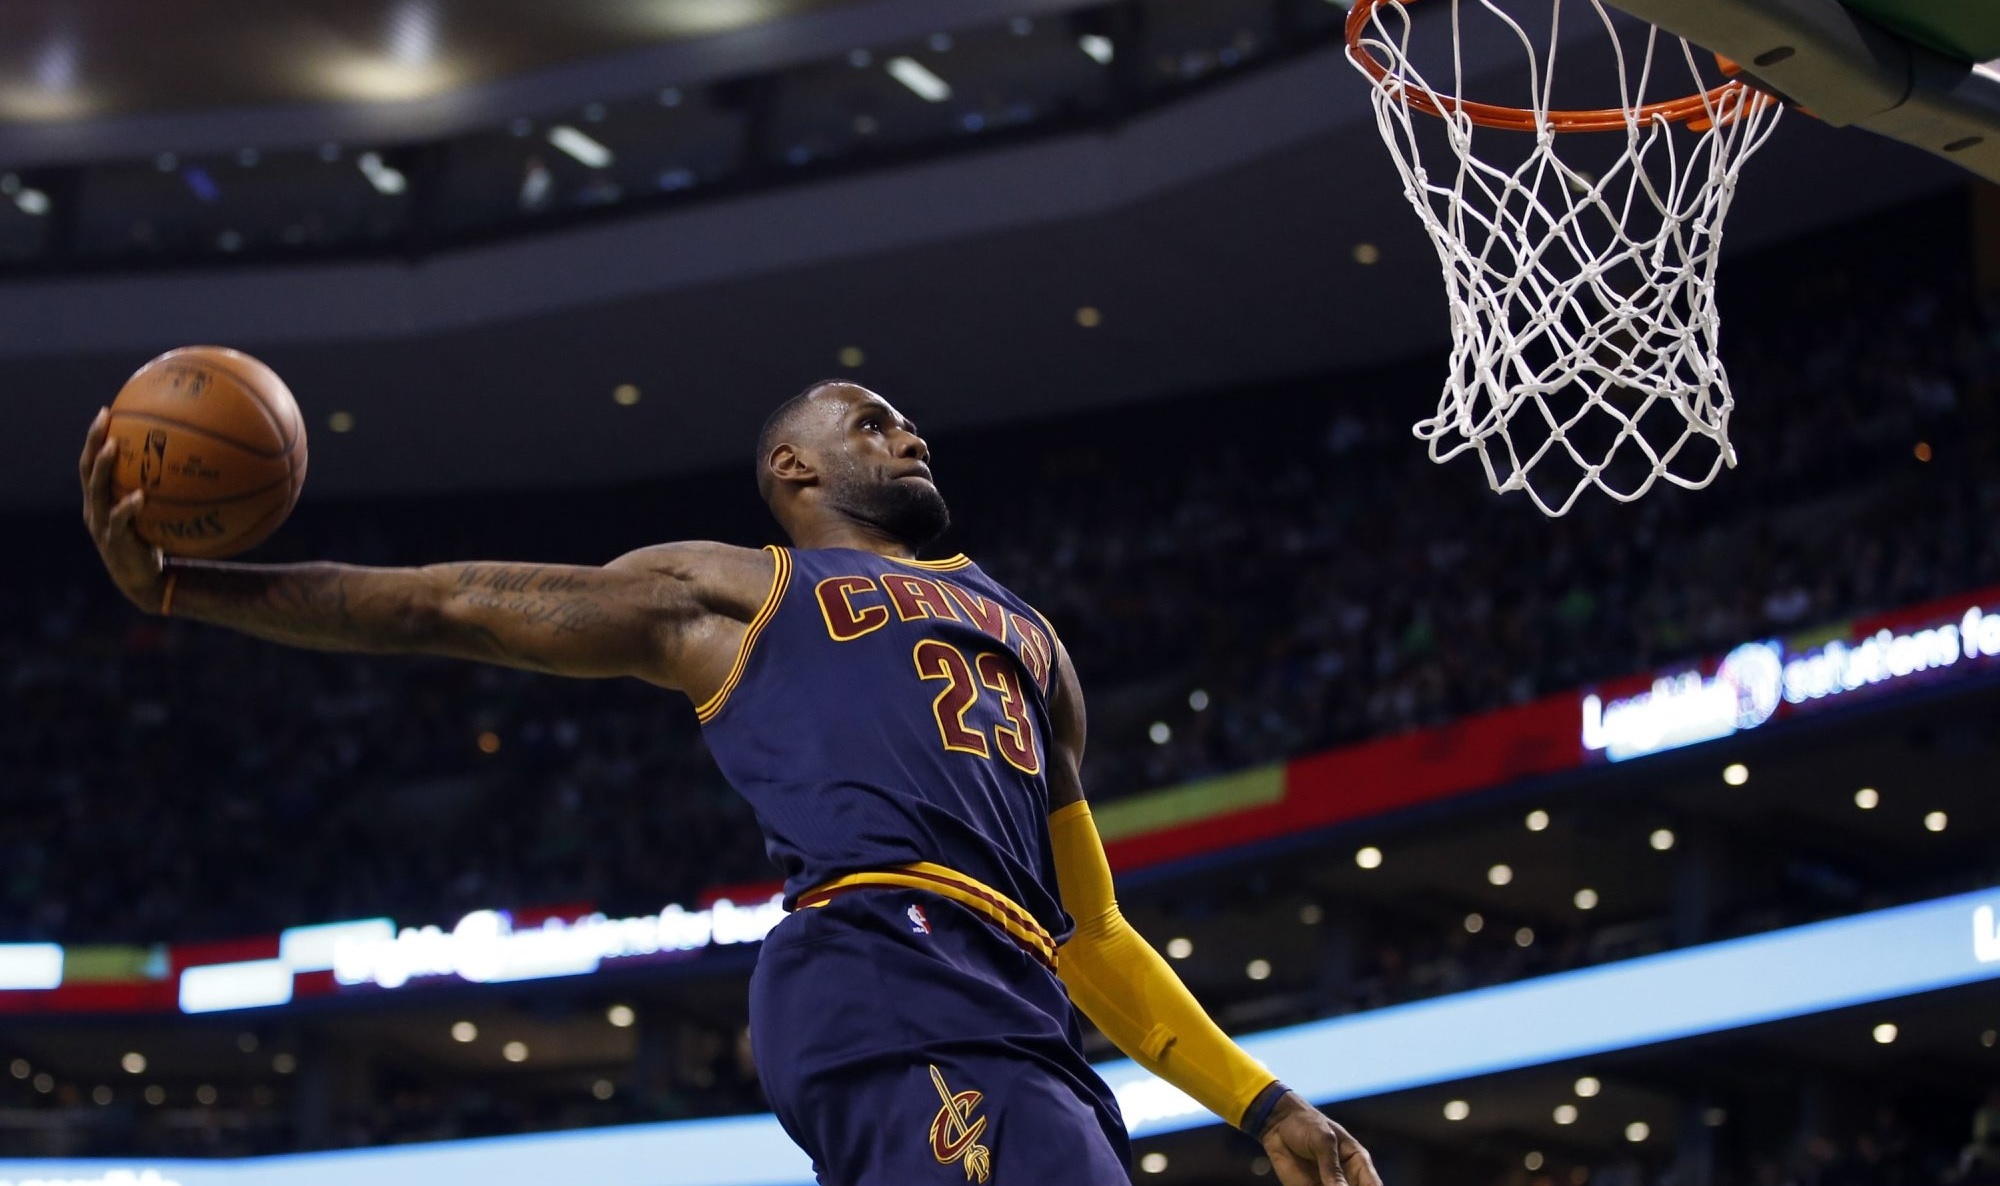 In his 14th season, LeBron James sets careerhigh for total dunks